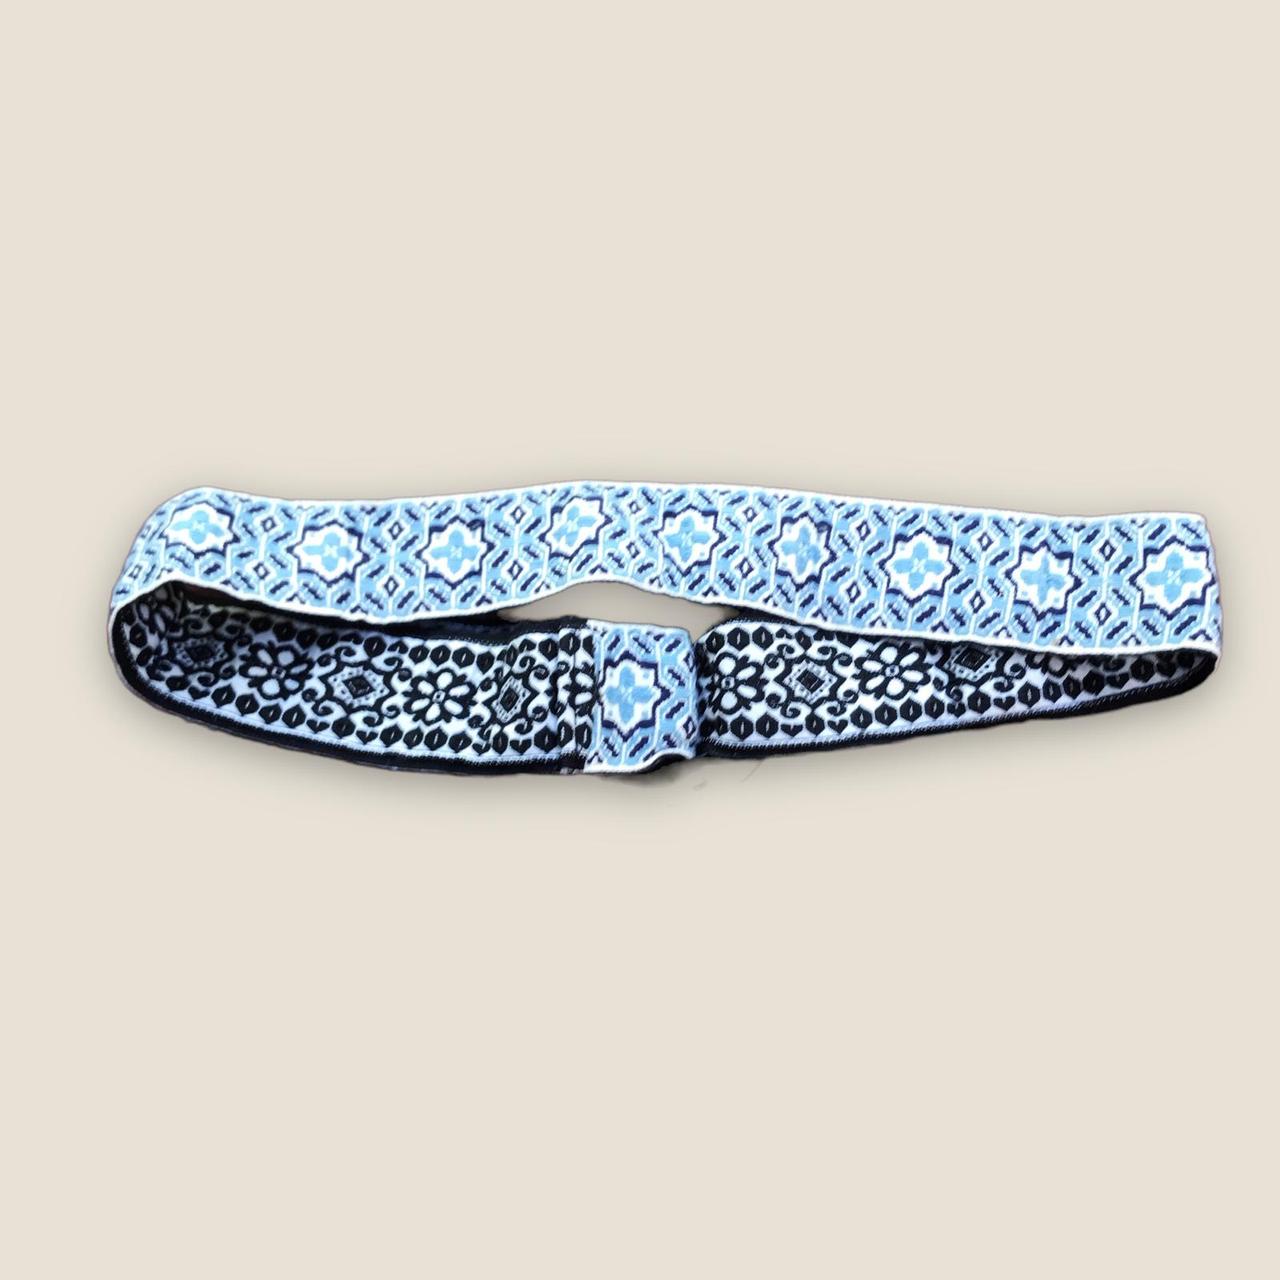 American Vintage Women's Blue and White Belt (4)